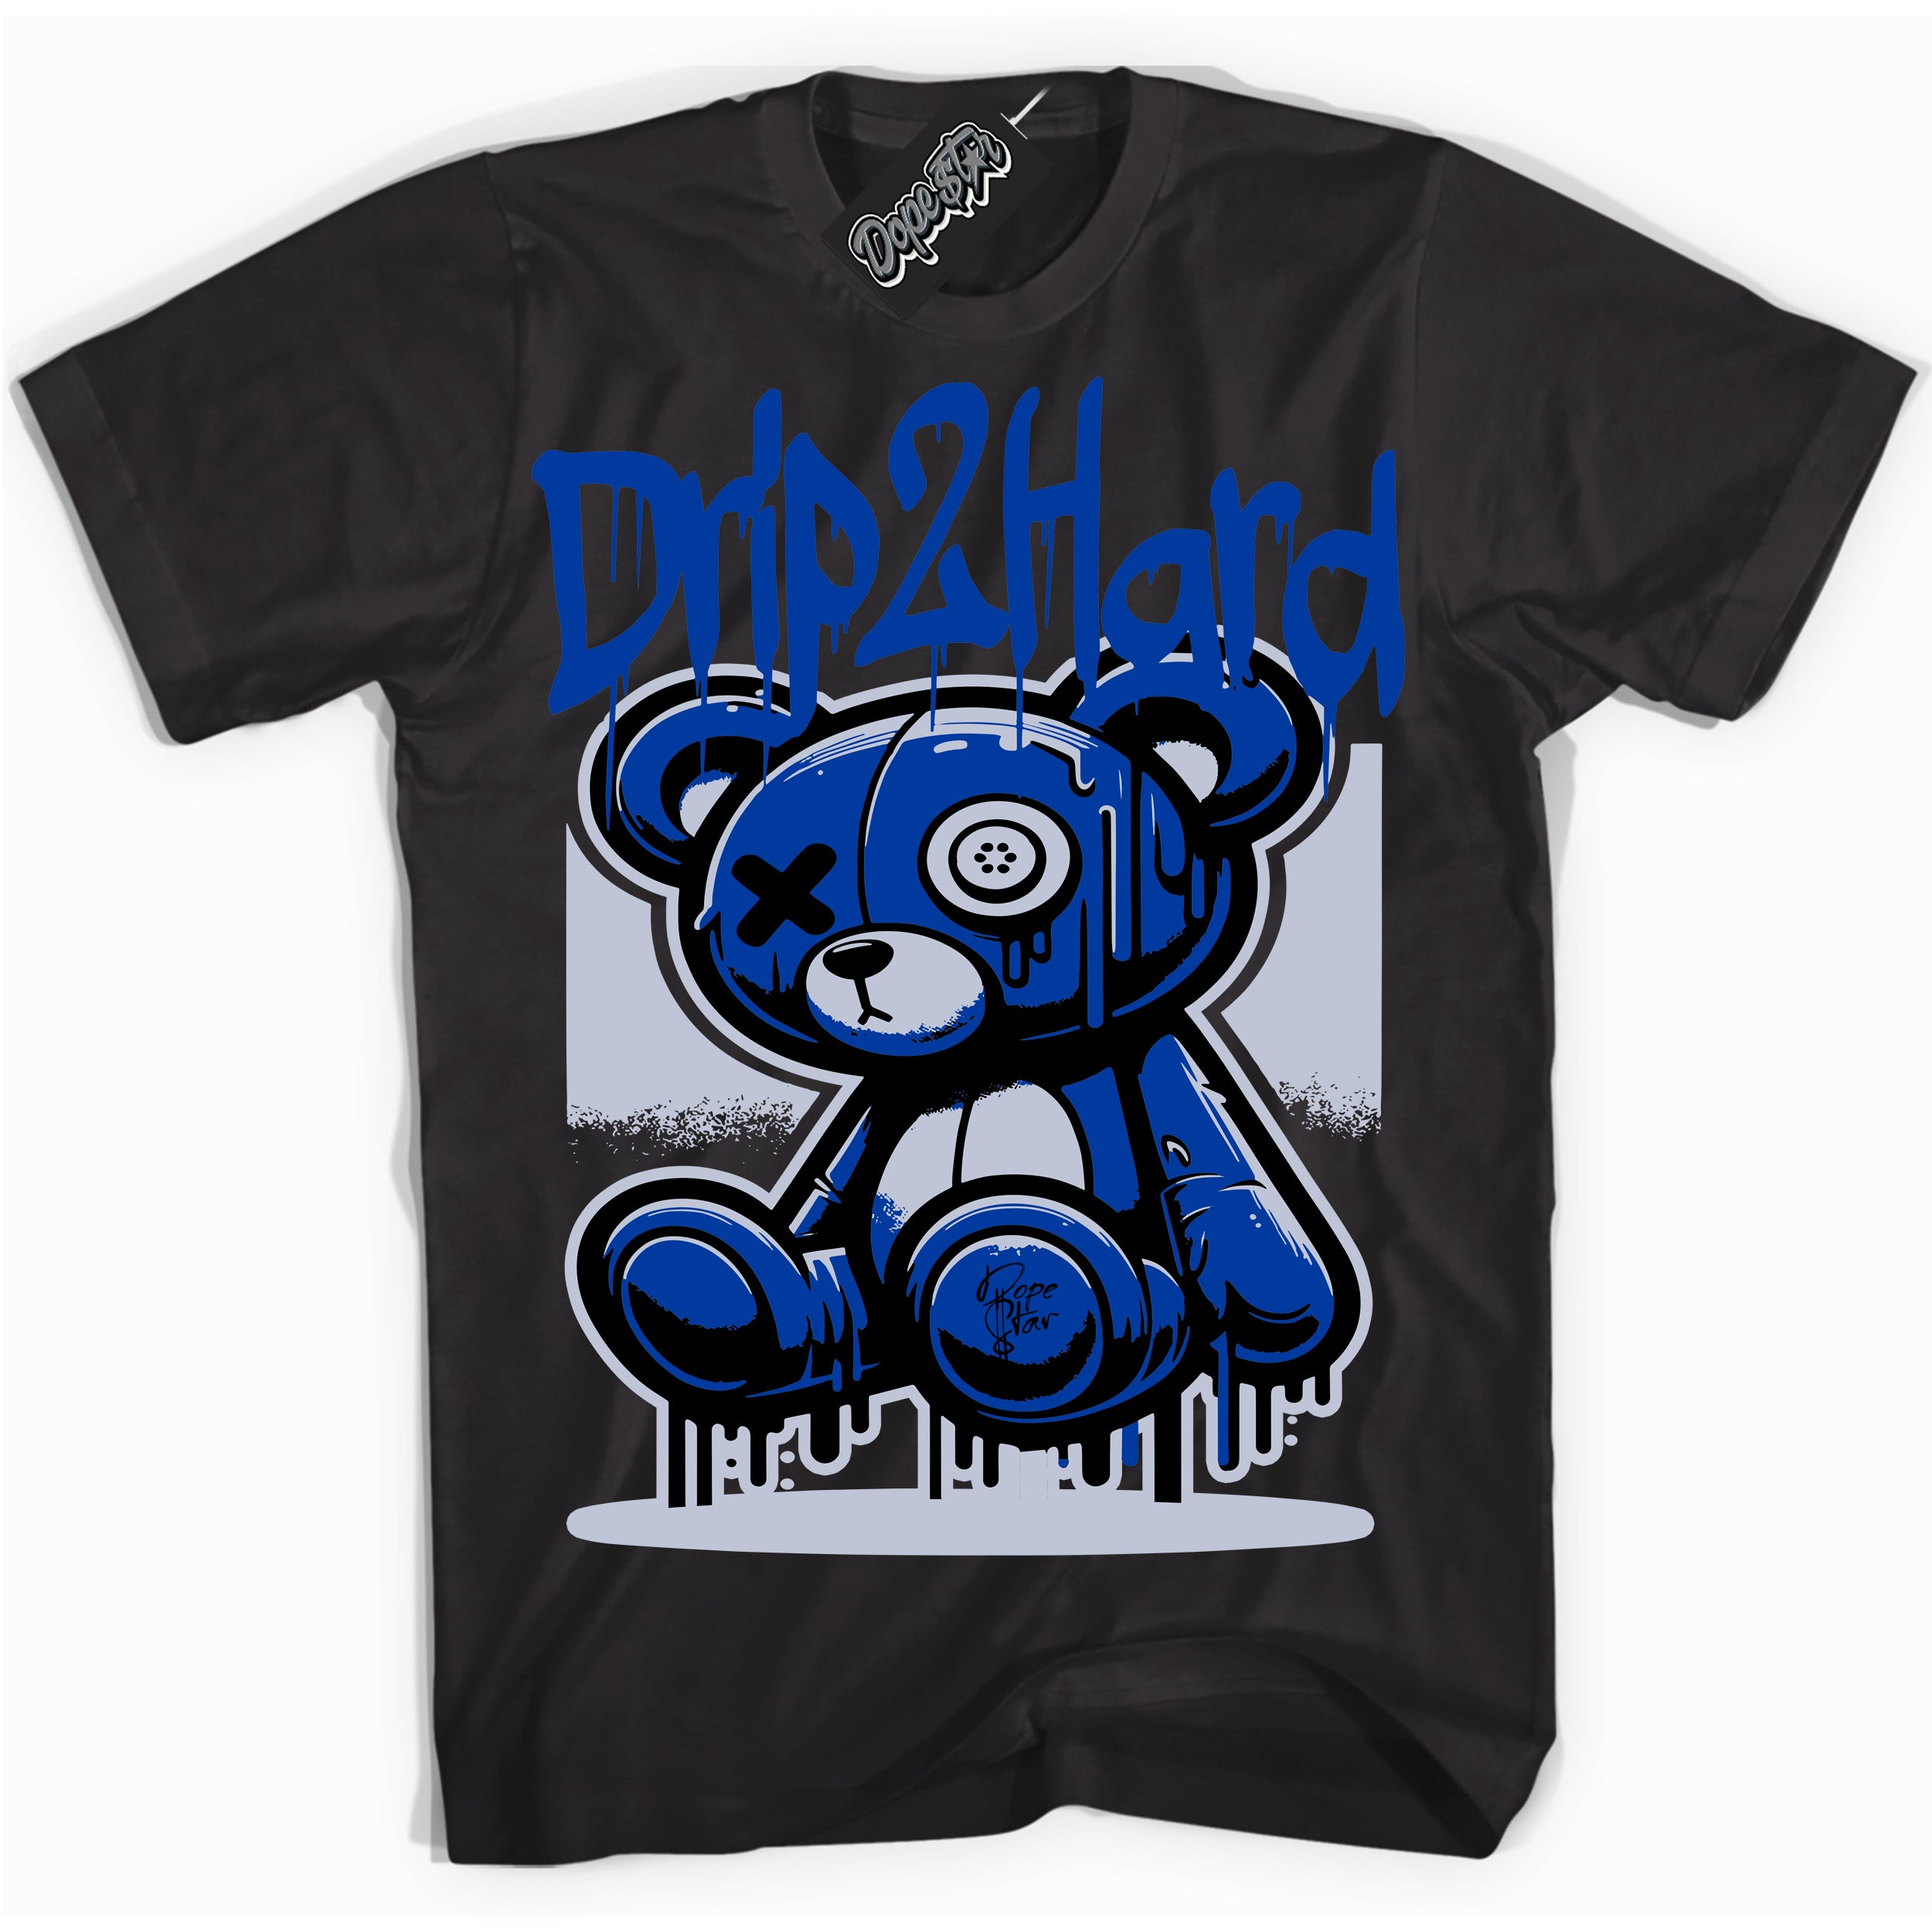 Cool Black graphic tee with “ Drip 2 Hard ” design, that perfectly matches Race Blue 5s